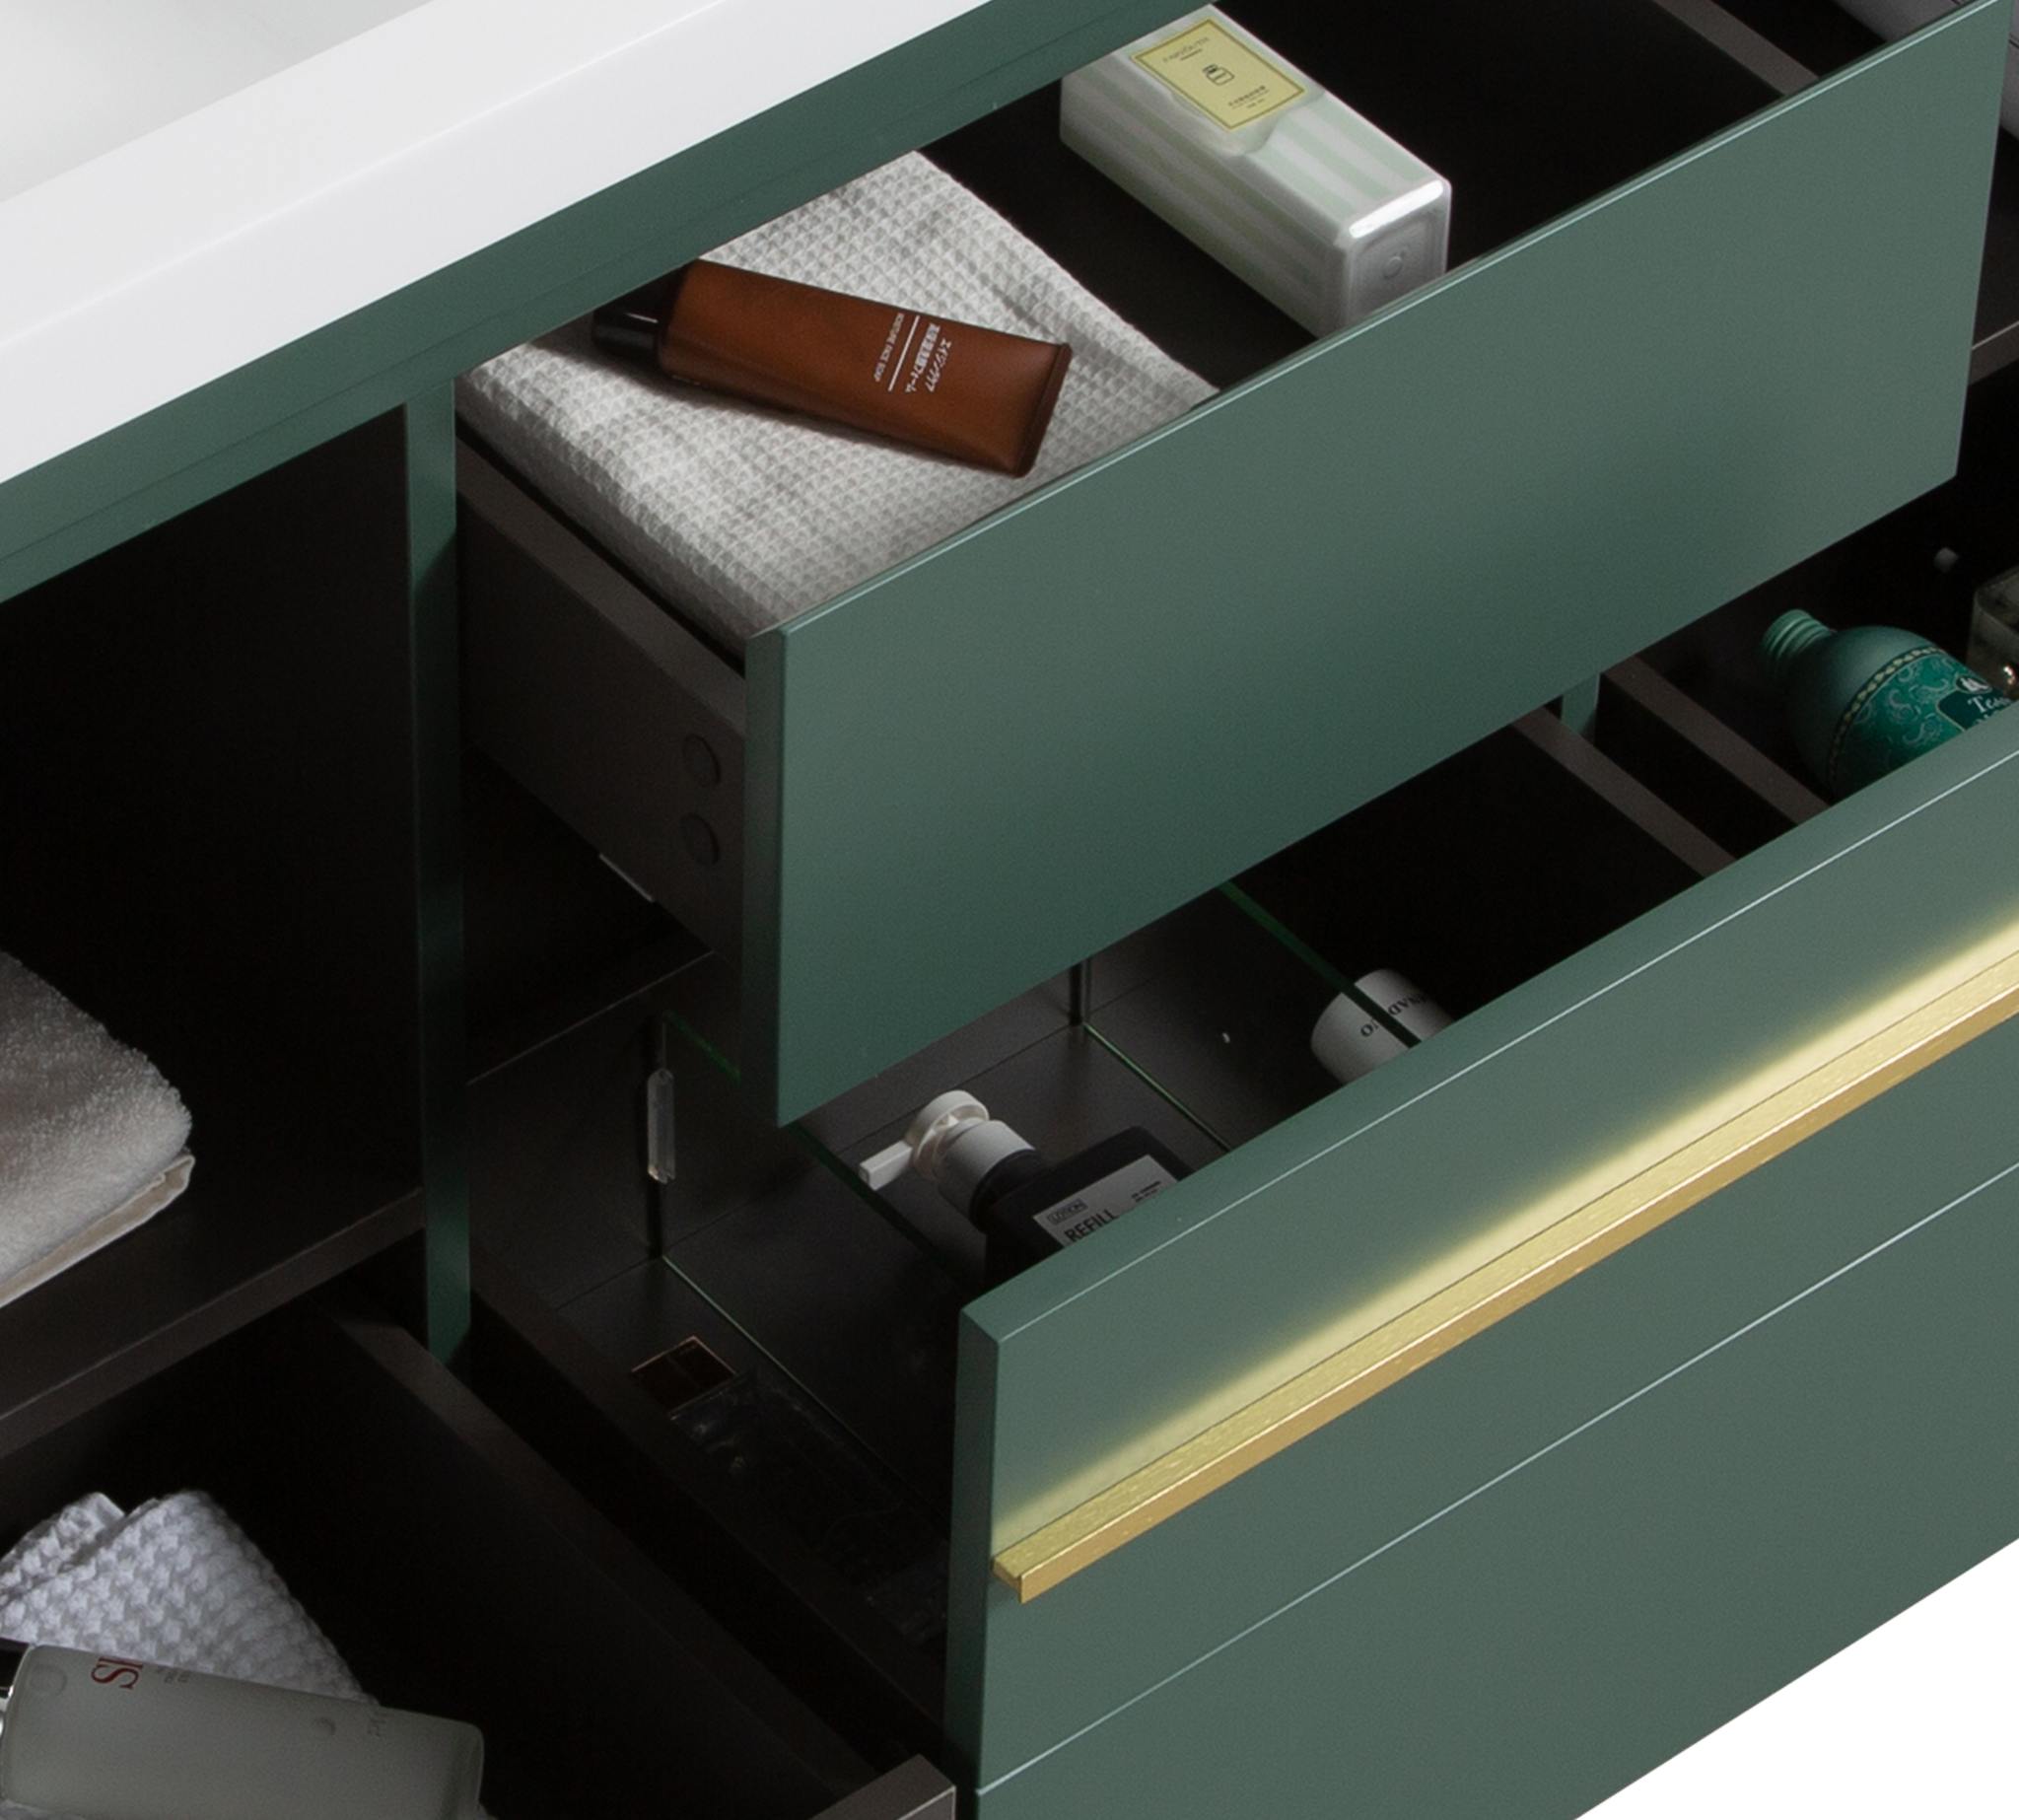 Granada 35.5 Nordic Green With Brush Gold Handle Cabinet, Square Cultured Marble Sink, Free Standing Modern Vanity Set